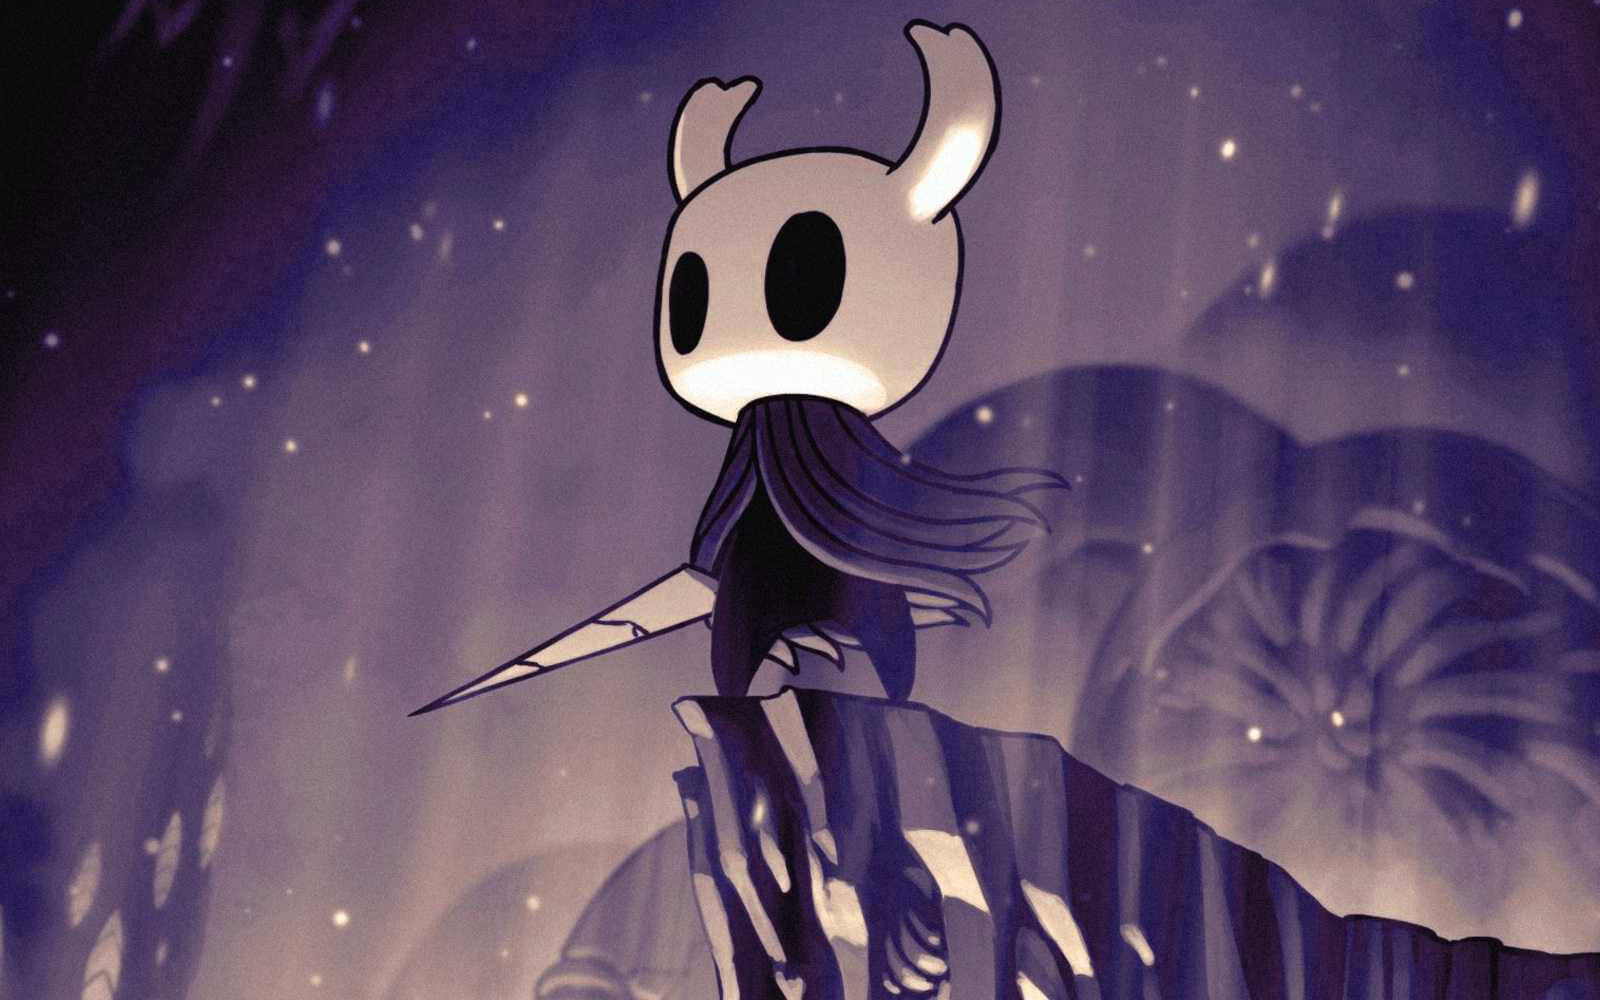 Hollow Knight - The Cane and Rinse videogame podcast